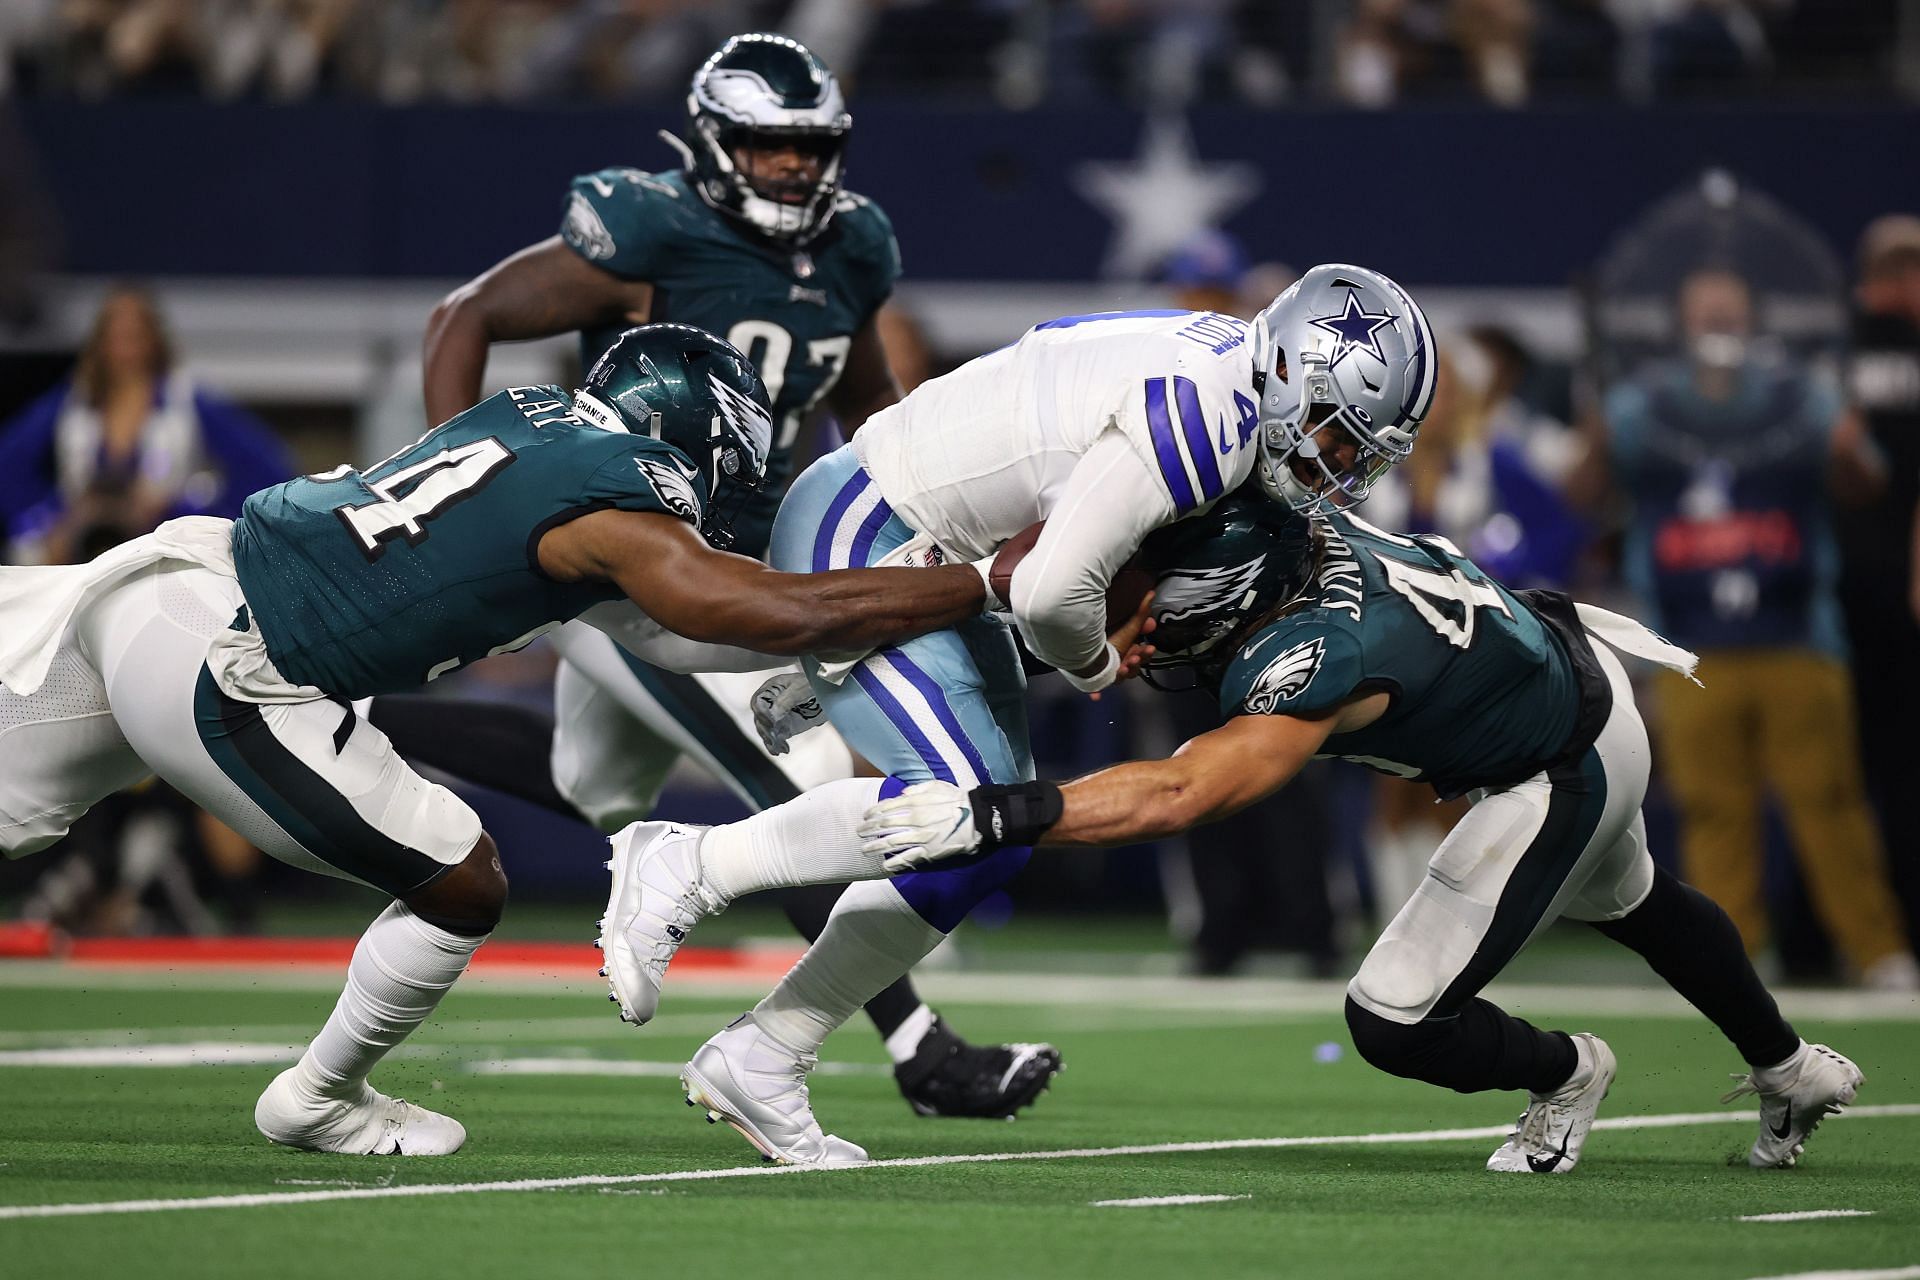 The Cowboys could take a step back in the NFC East during the 2022 season